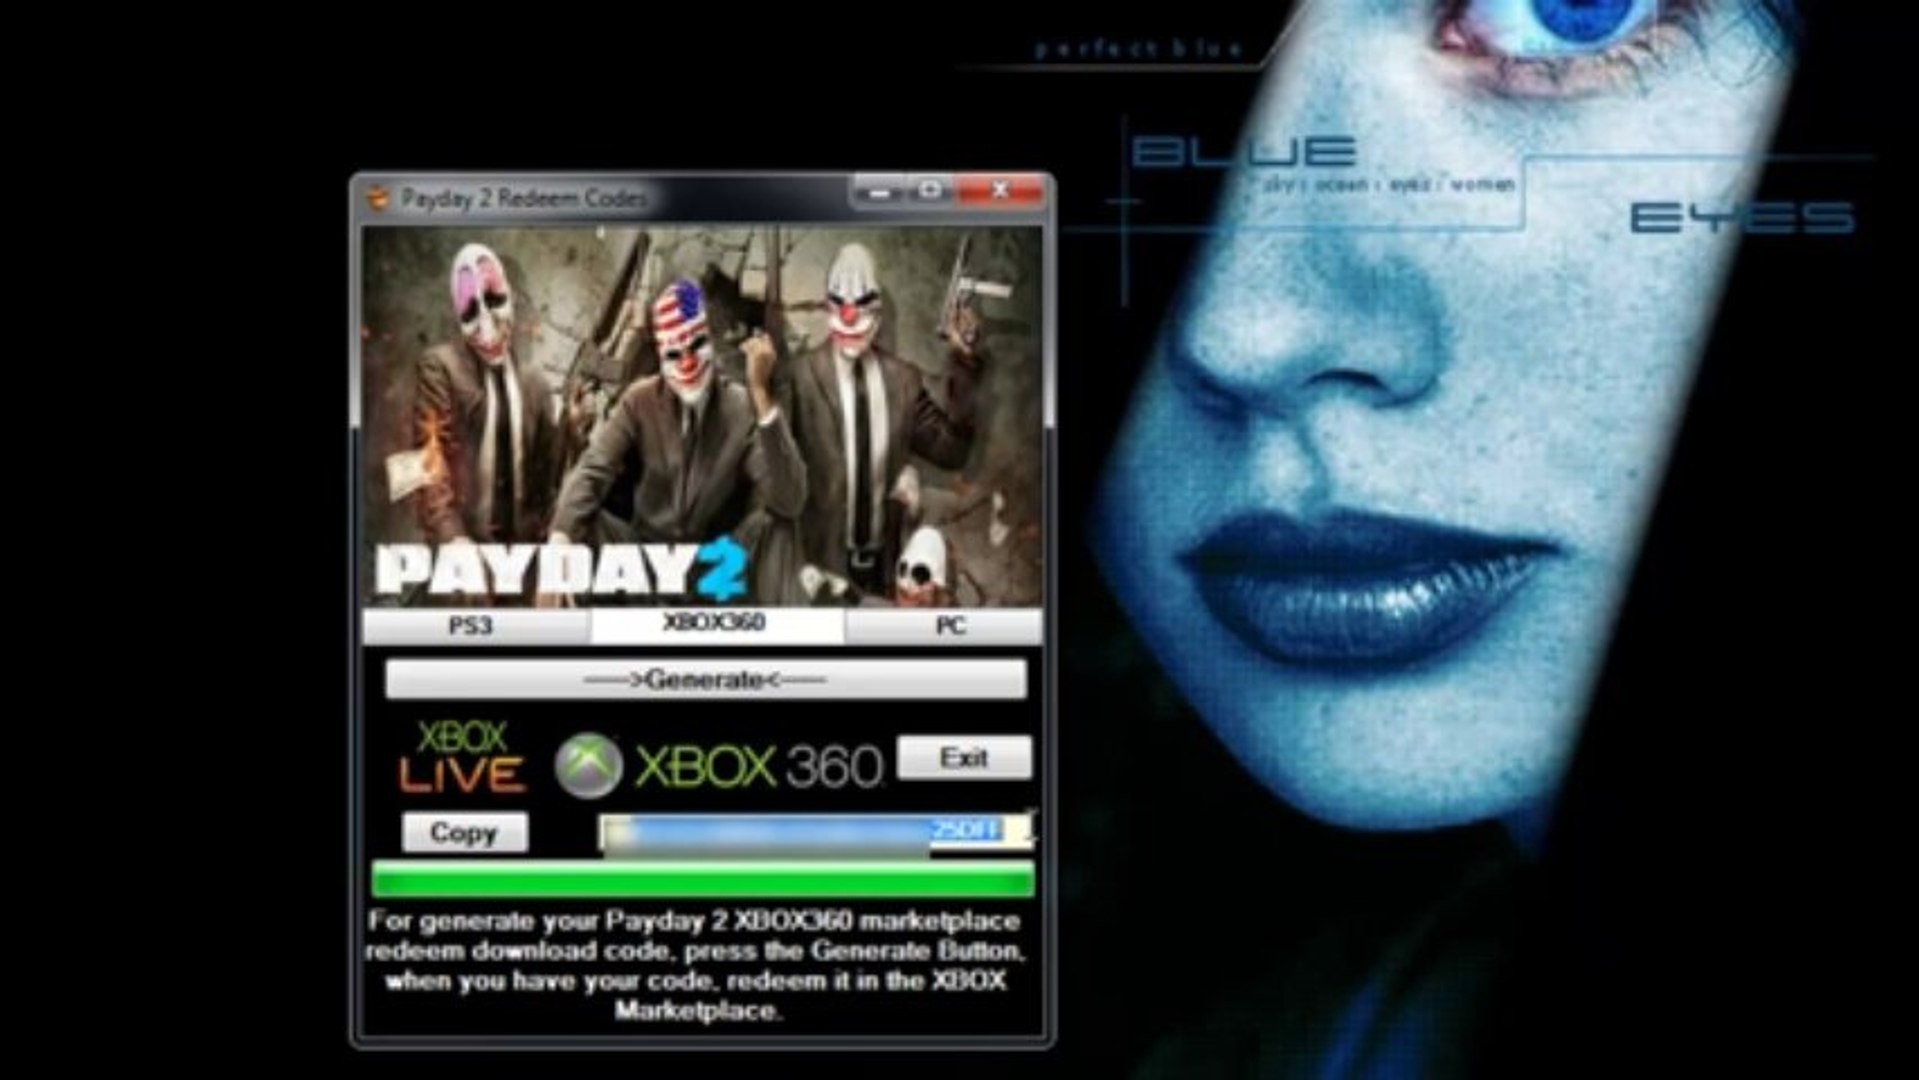 Payday 2 Key Generator [PC, PS3, Xbox 360] - video Dailymotion